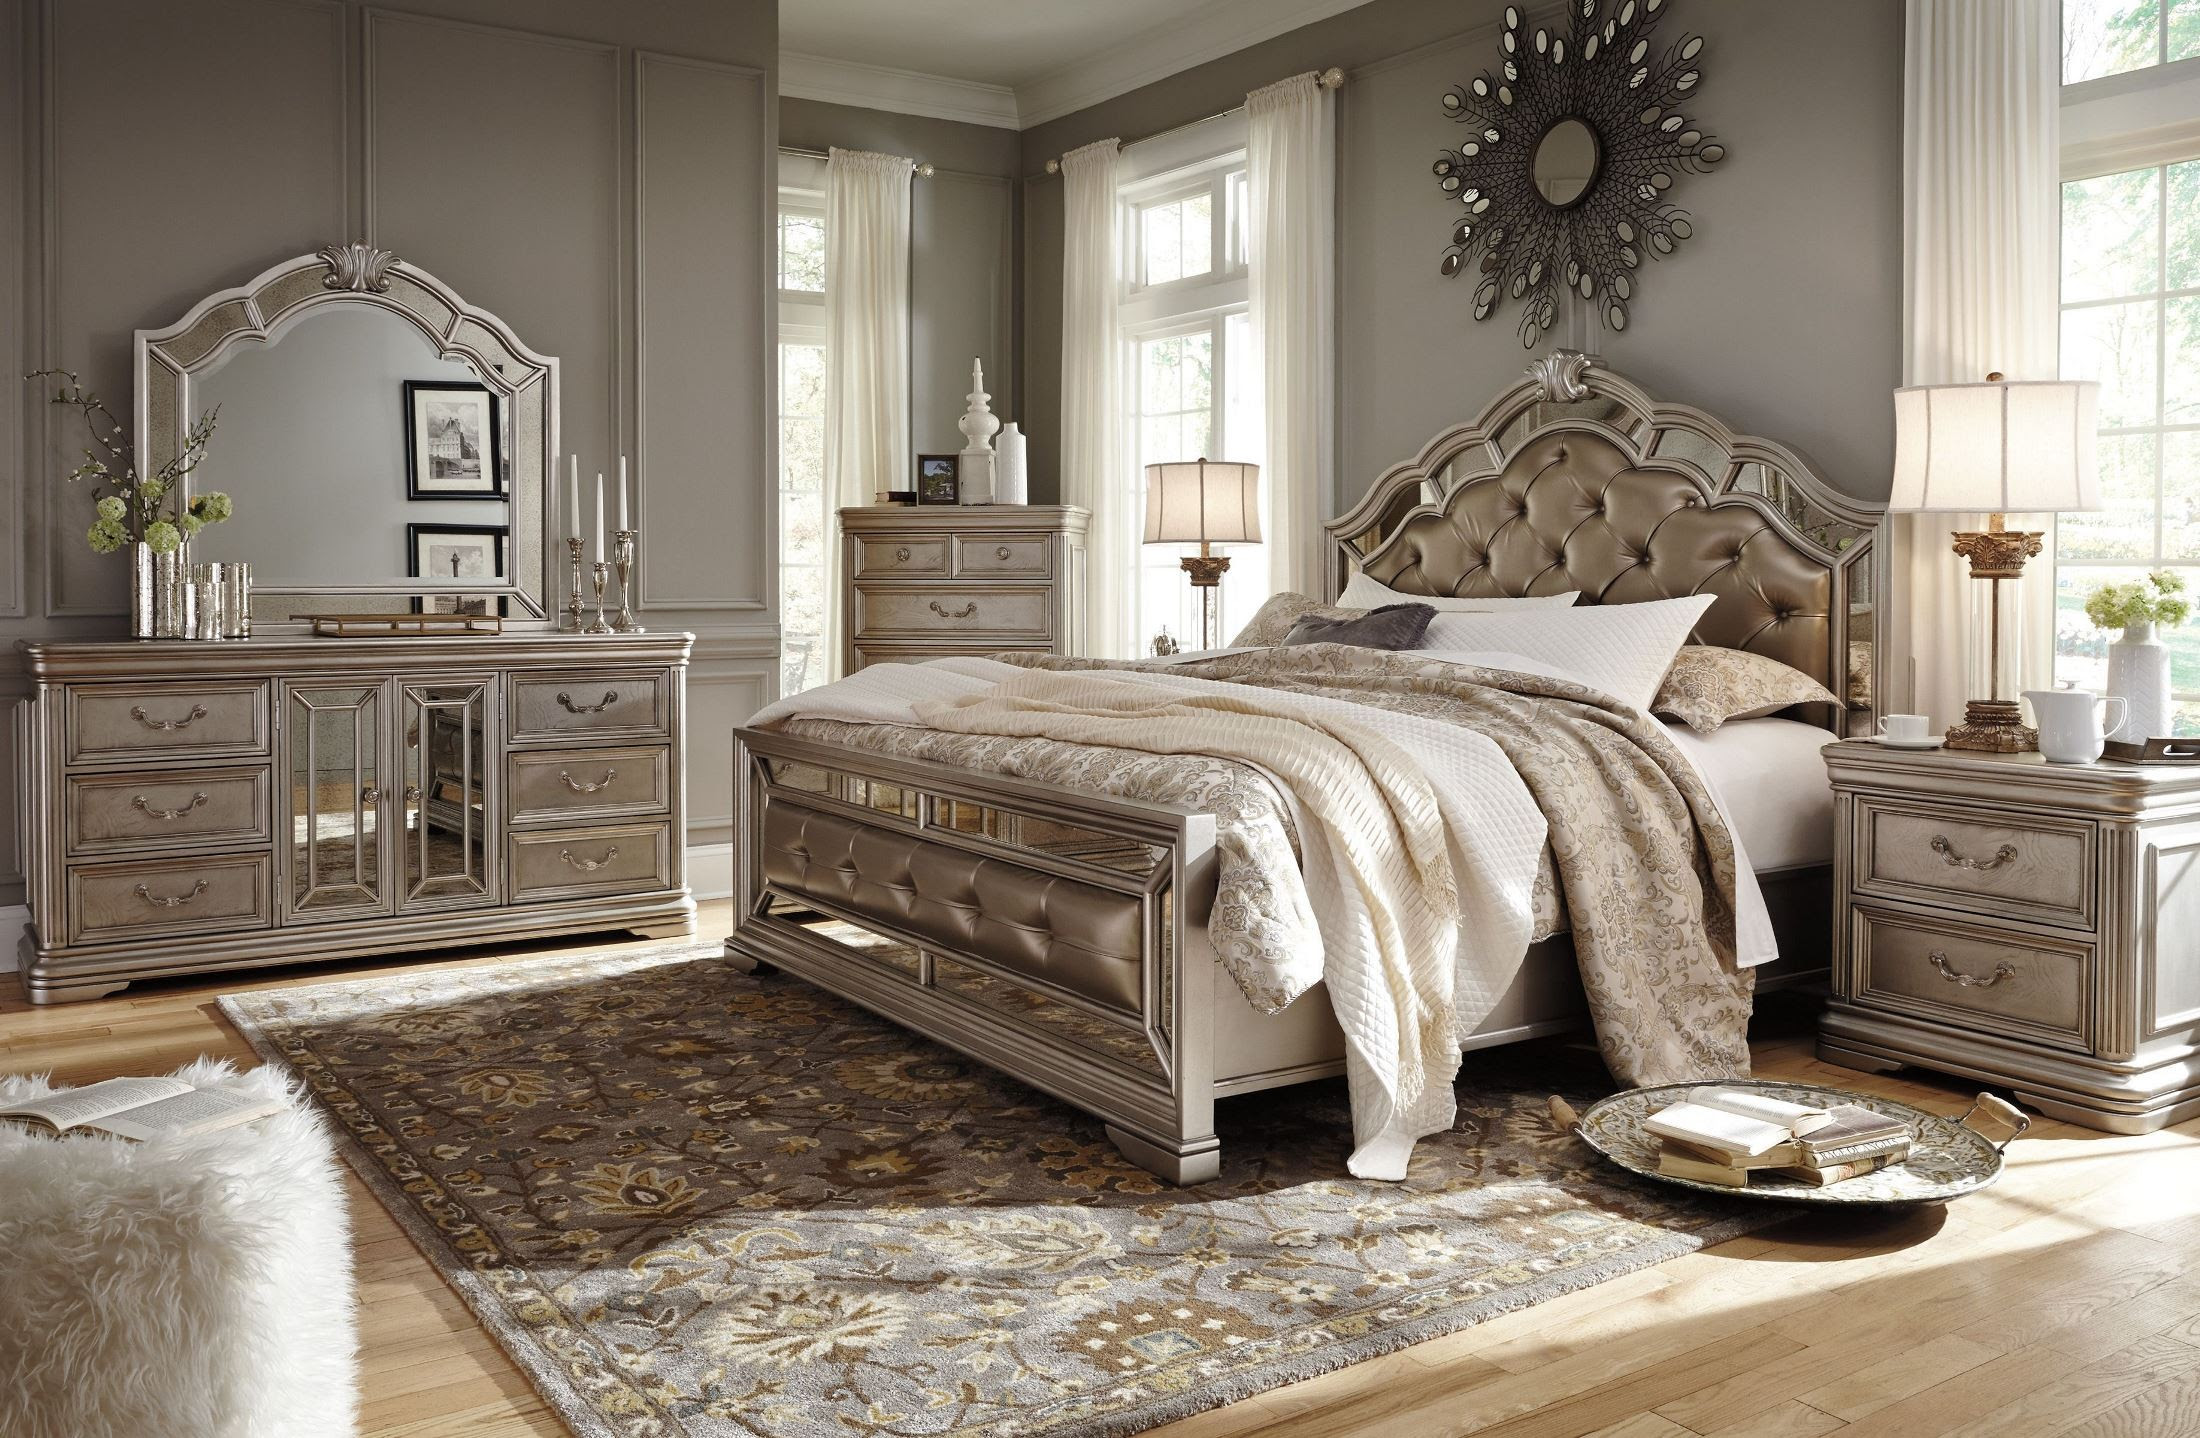 Home Design Ideas Fantastic Bedroom Furniture Set Which Matching